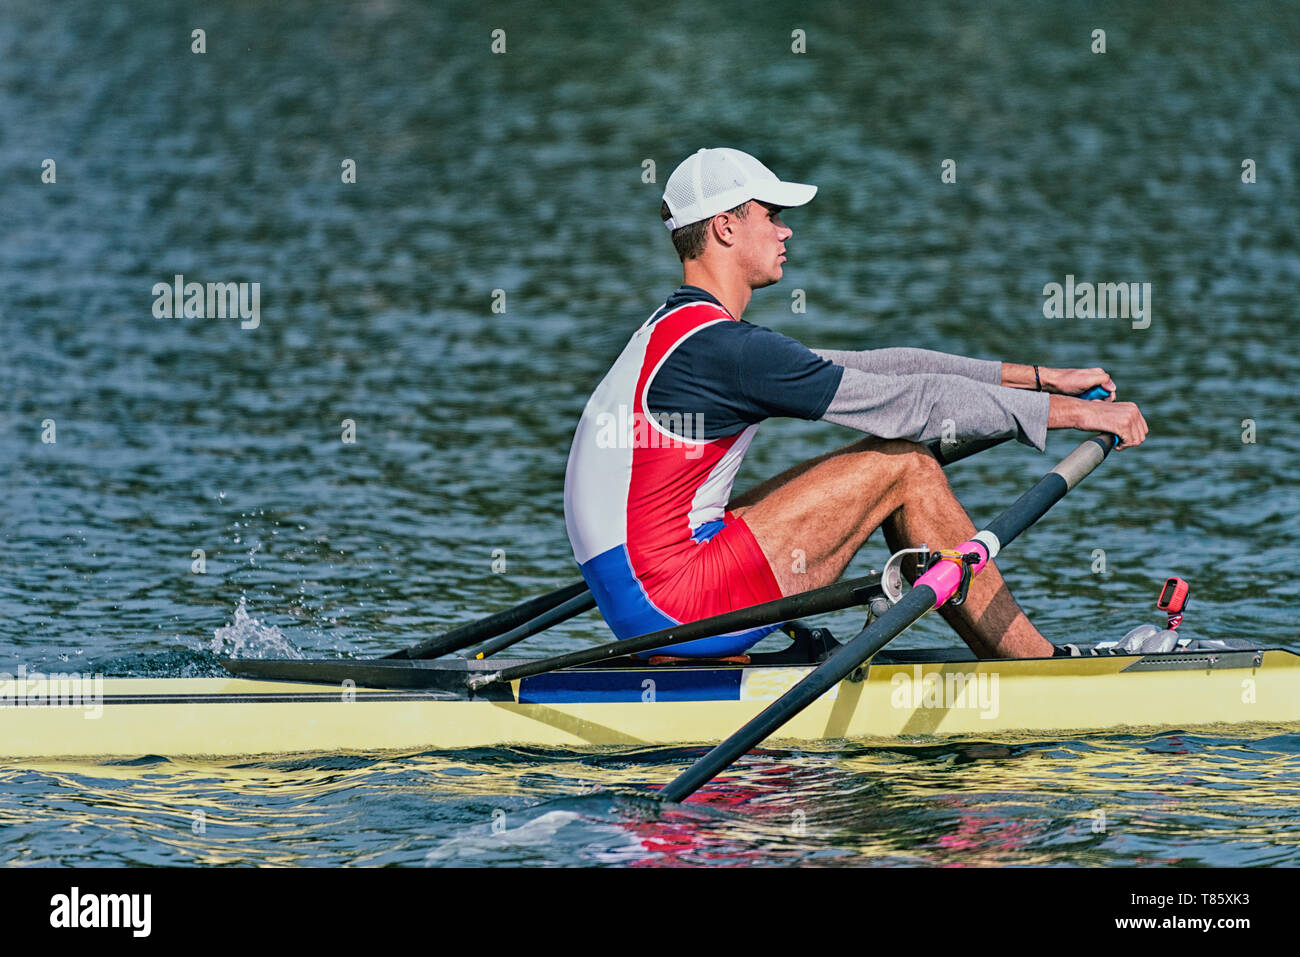 Man rowing scull Banque D'Images